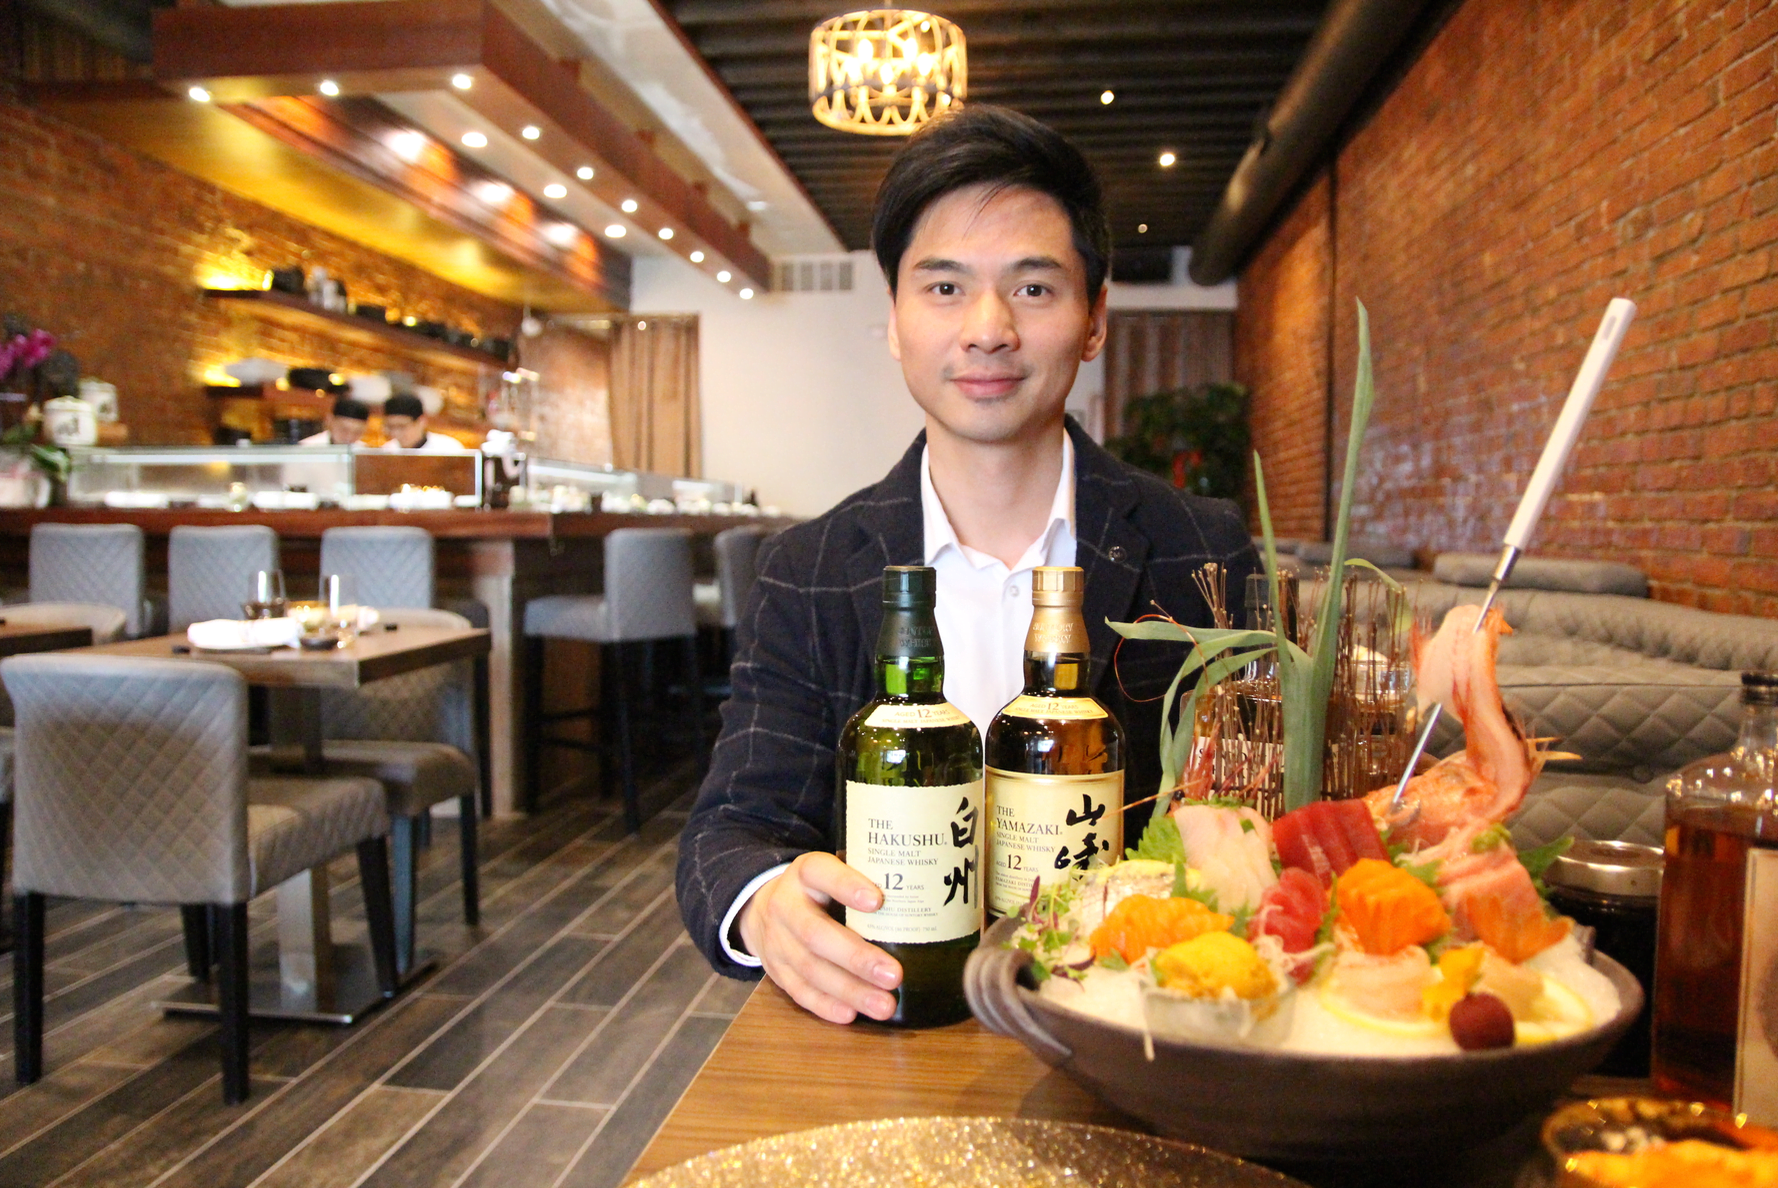 K Dong at his successful restaurant on Greenwich Avenue, Miku Sushi. Photo: Leslie Yager